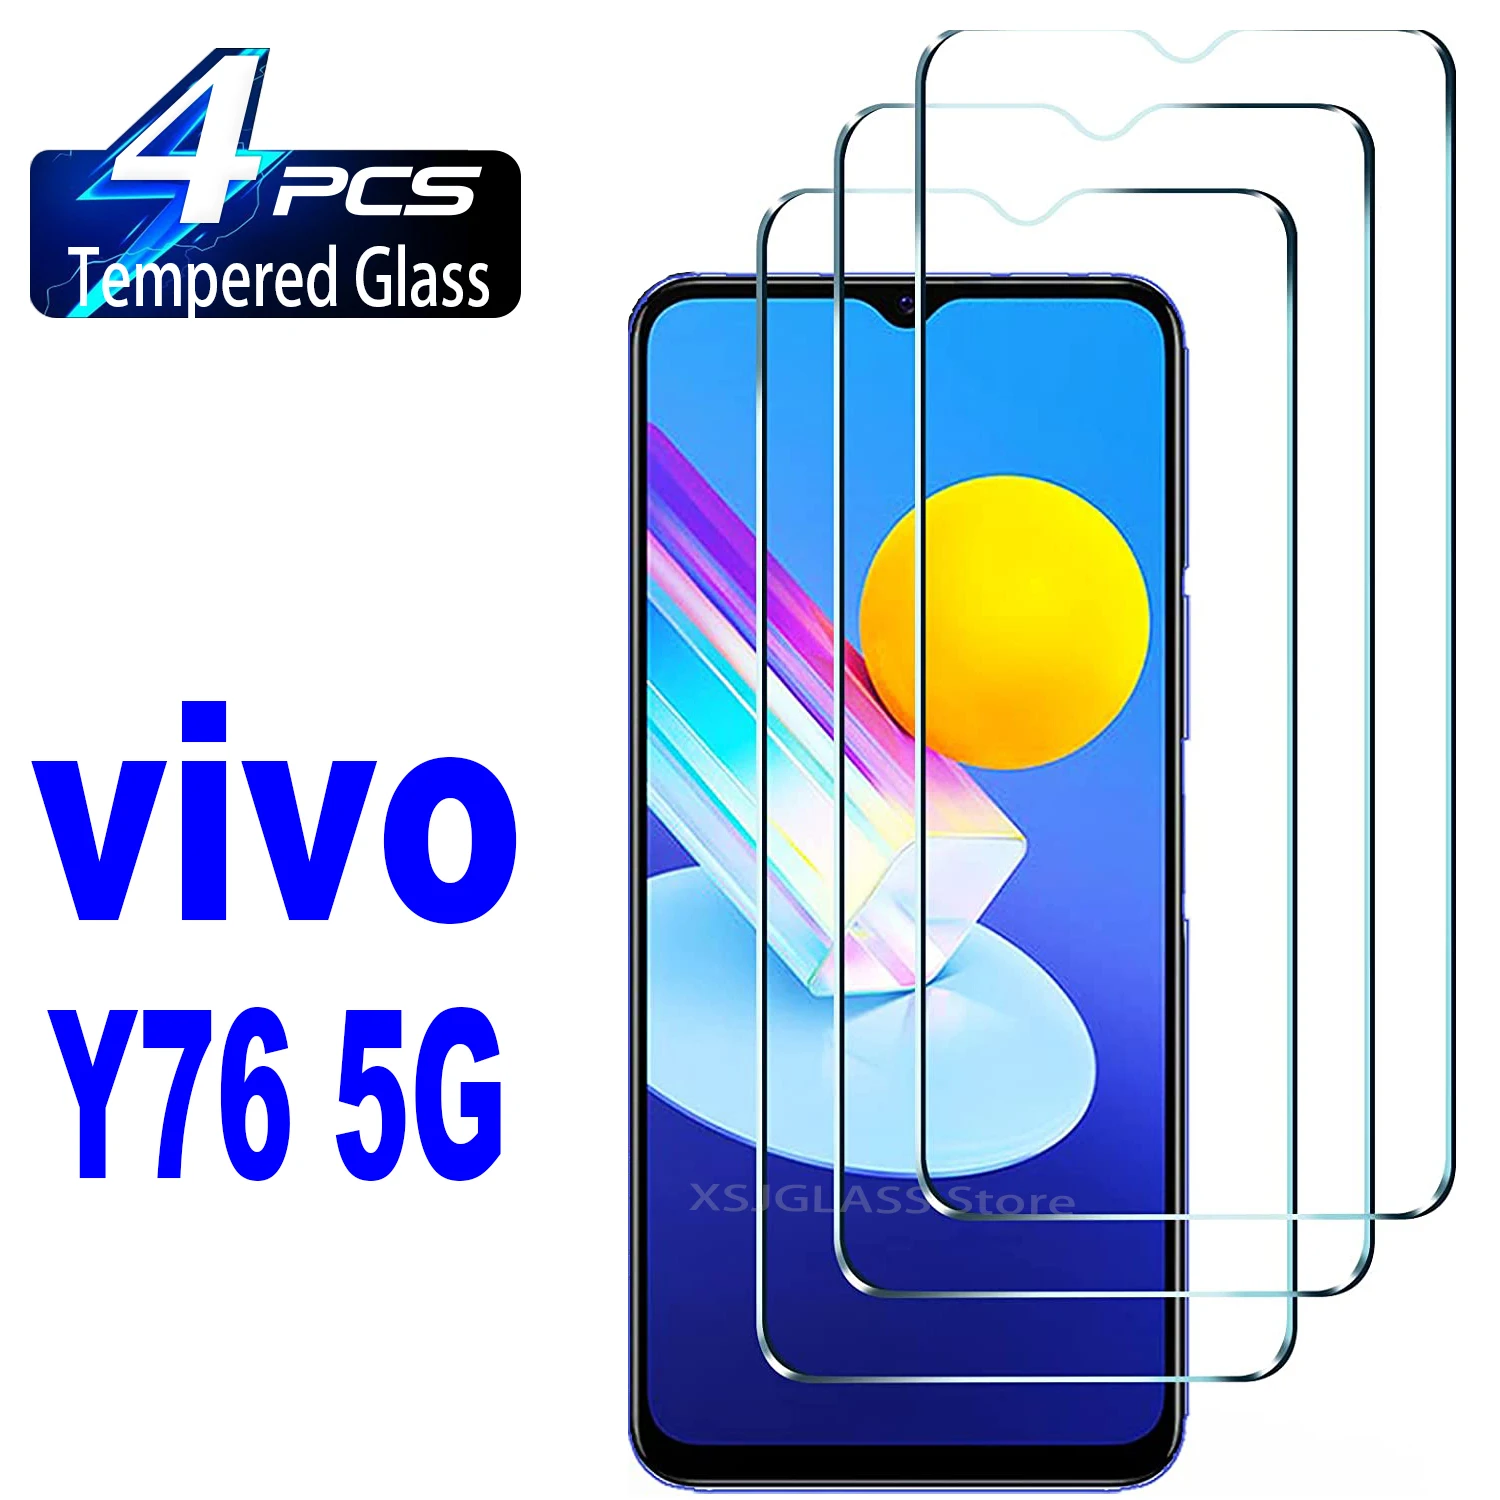 2/4Pcs Tempered Glass For Vivo Y76 5G Screen Protector Glass Film 2 4pcs tempered glass for vivo y20 y20s y20i y20sg 2021 y20t y20a y20g screen protector glass film